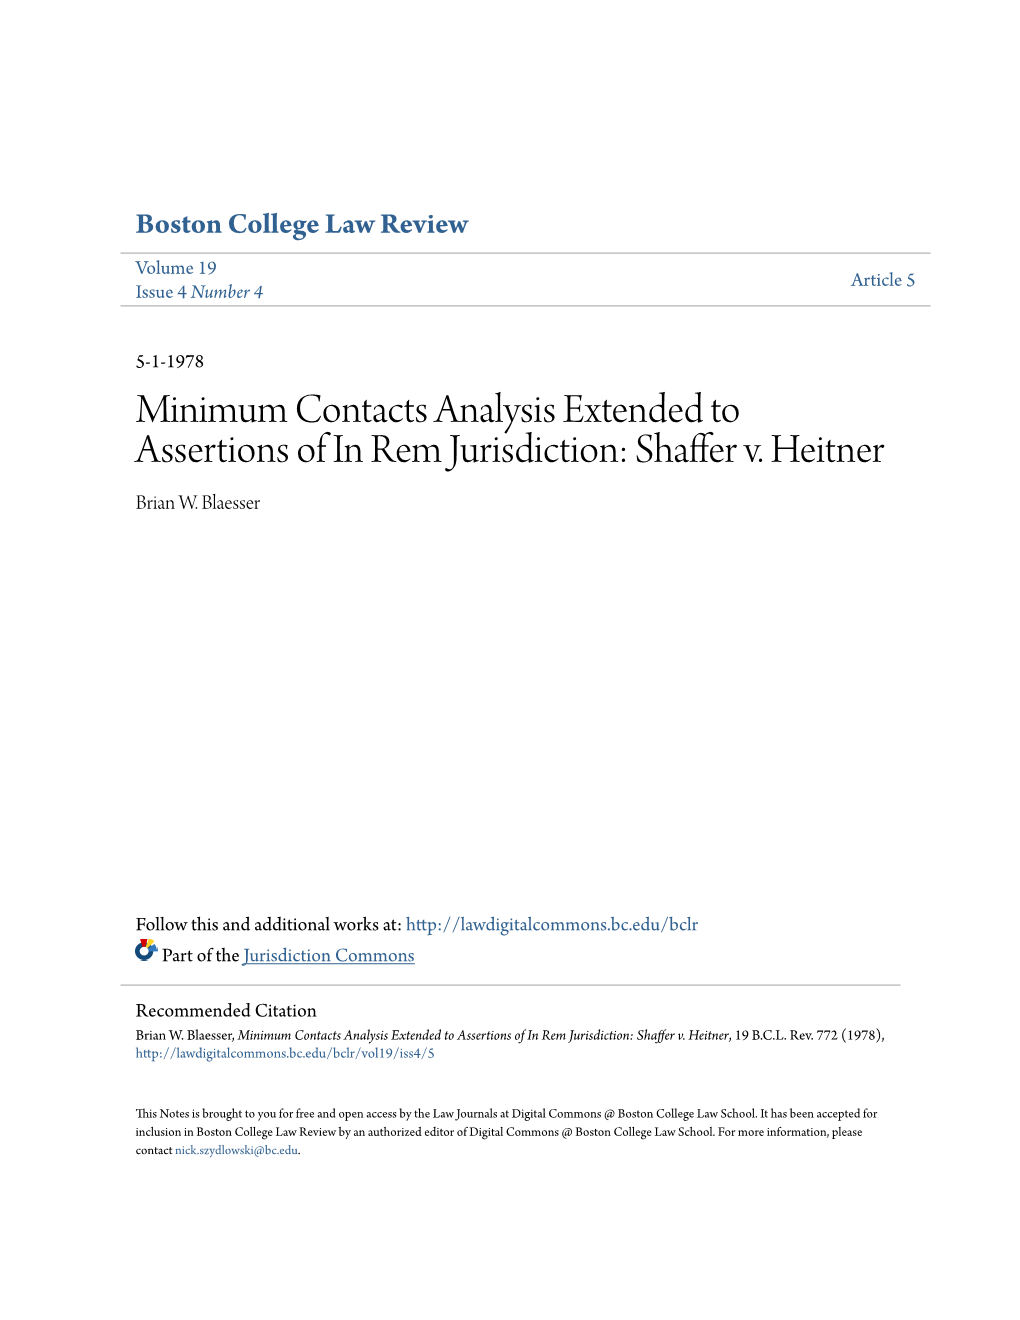 Minimum Contacts Analysis Extended to Assertions of in Rem Jurisdiction: Shaffer V